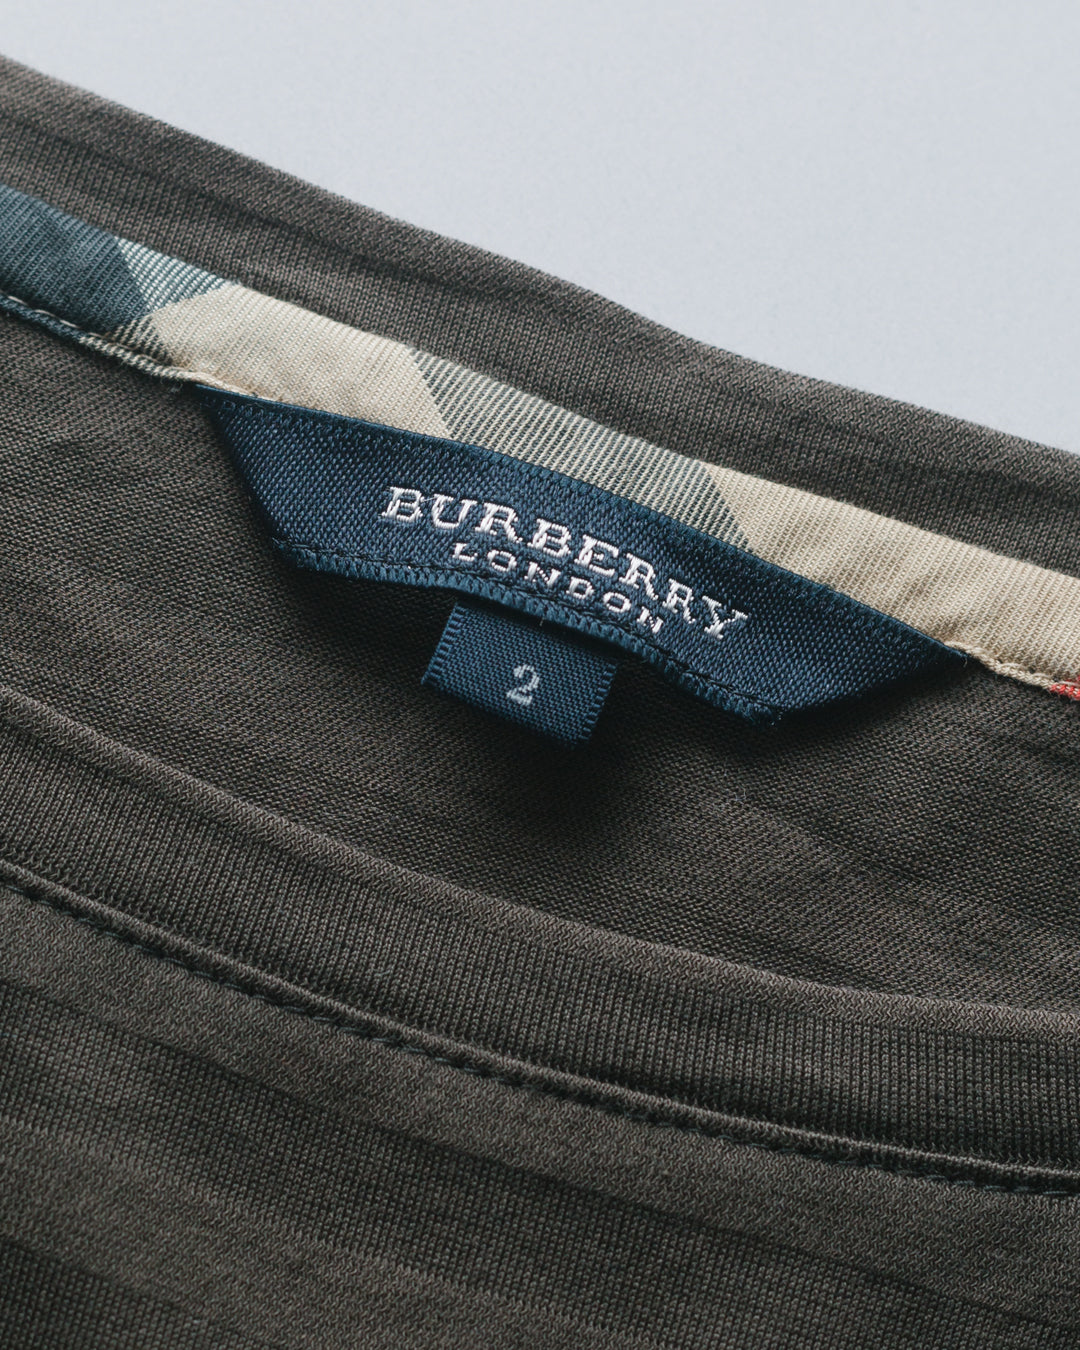 Burberry striped cotton top